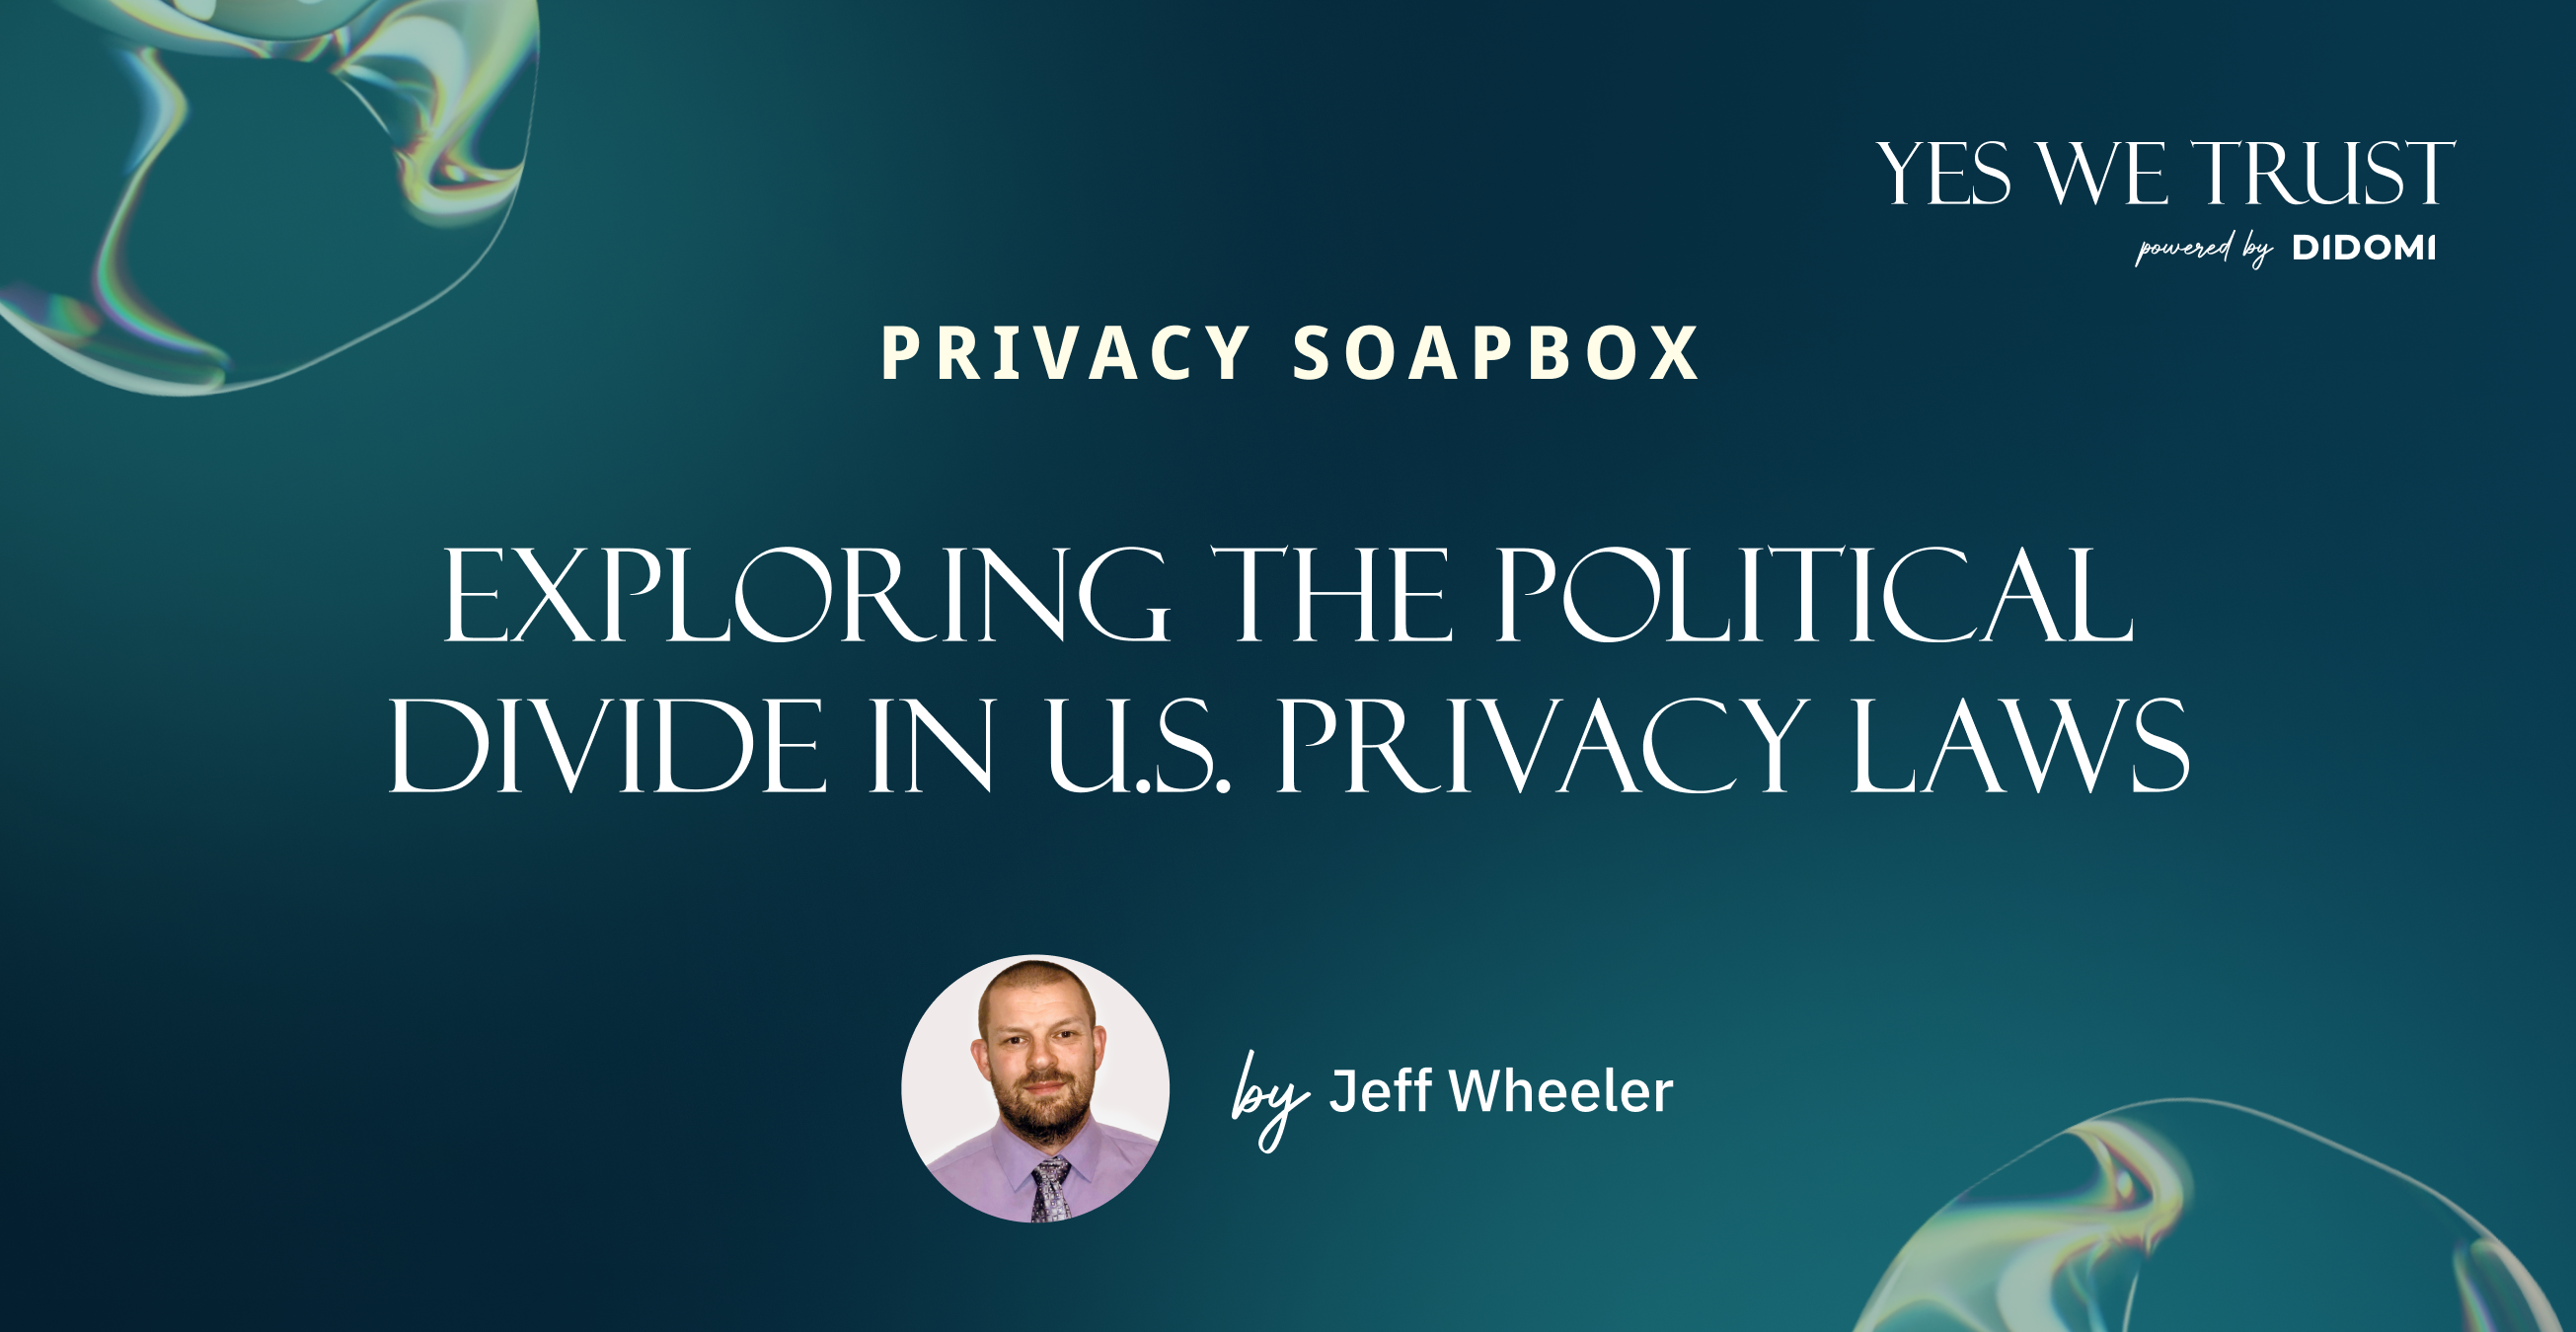 Exploring the political divide in U.S. privacy laws